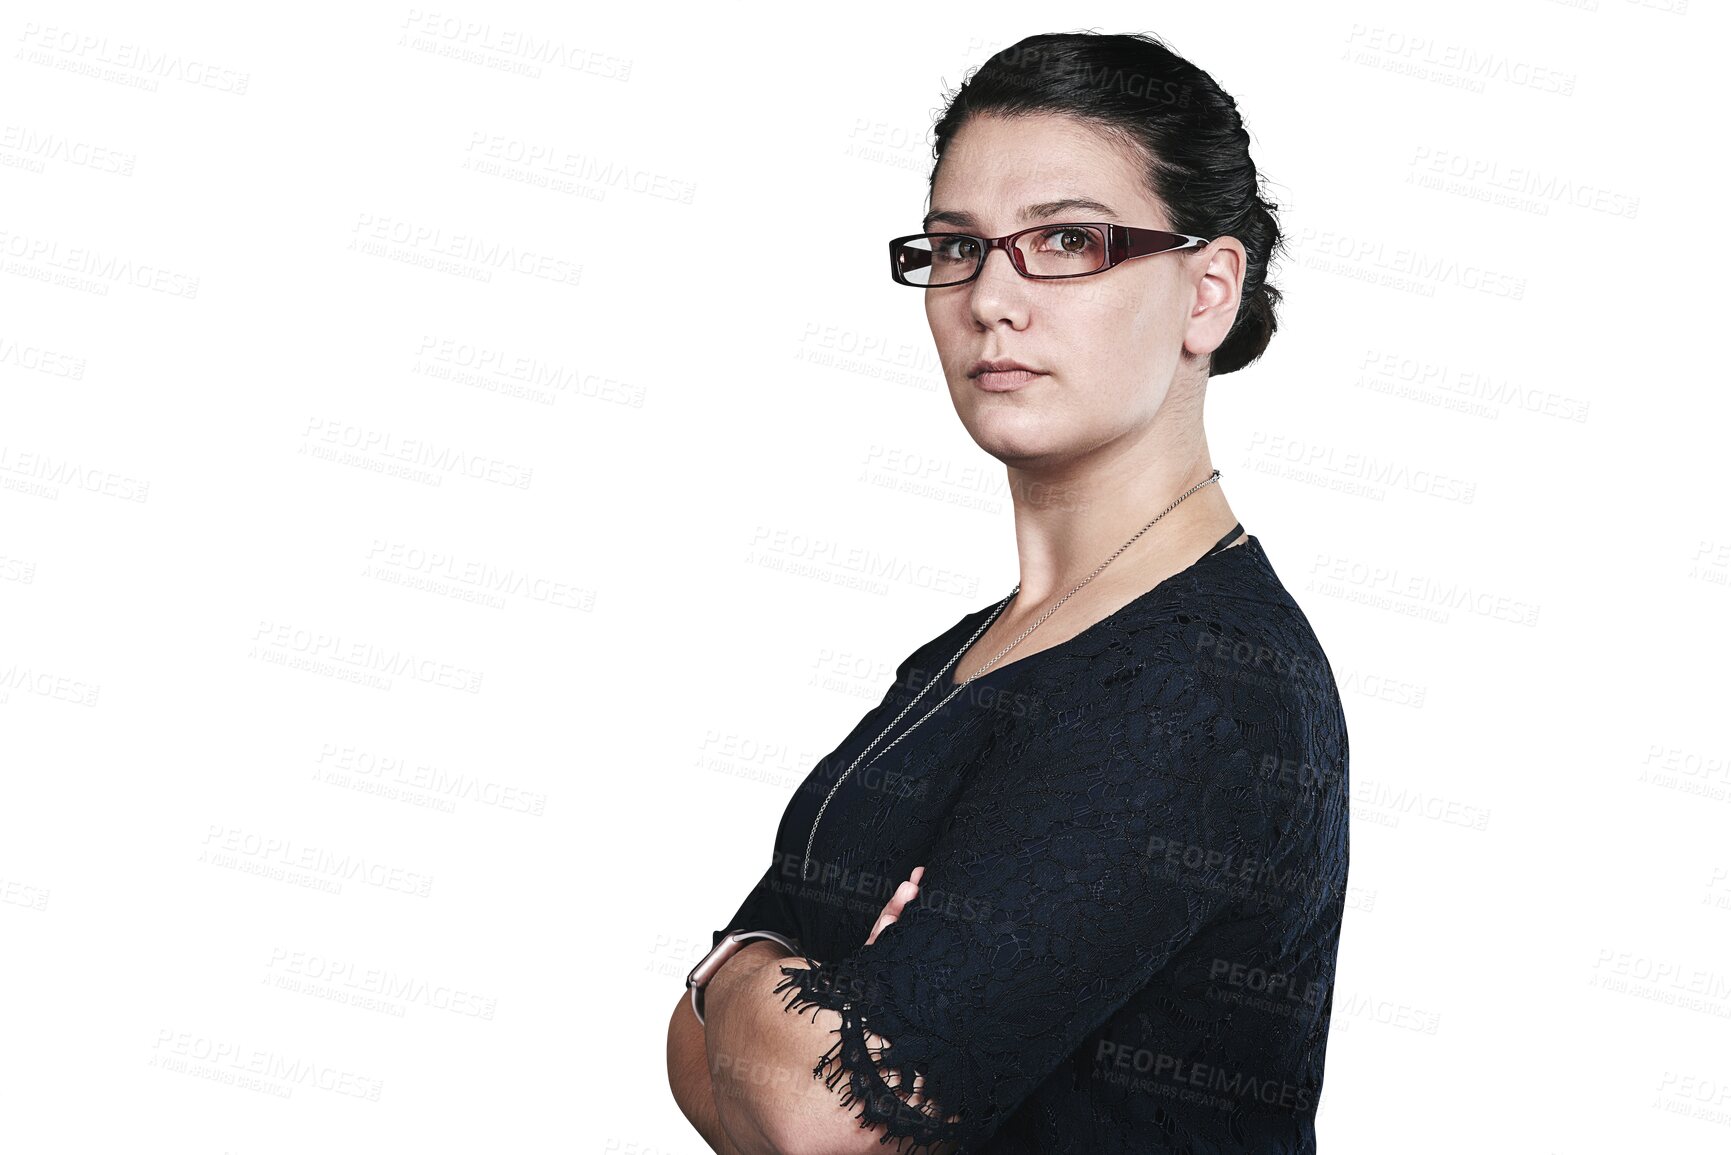 Buy stock photo Teacher, woman is serious and arms crossed in glasses, education and academic professional on png transparent background. Educator, school or university portrait for learning, knowledge and vision